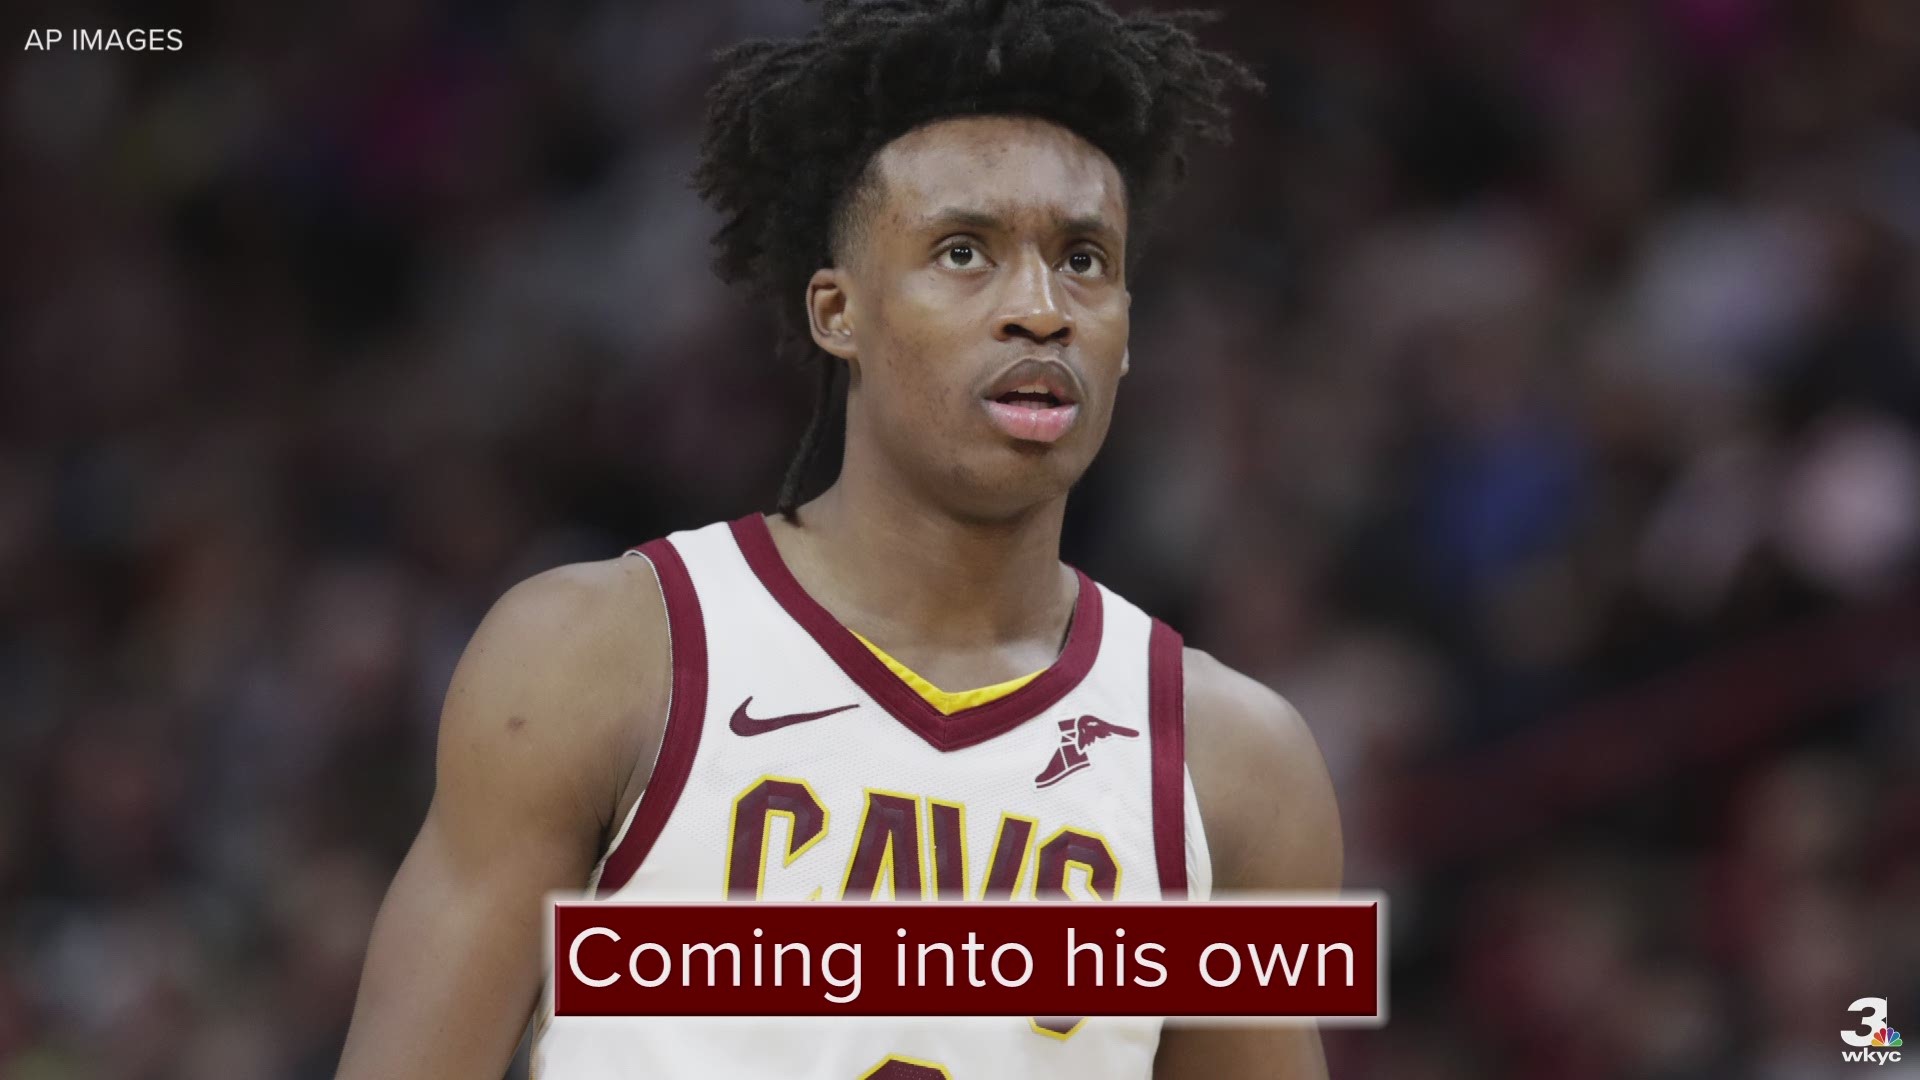 After some early-season struggles, rookie point guard Collin Sexton is becoming the consistent scorer the Cleveland Cavaliers need him to be.